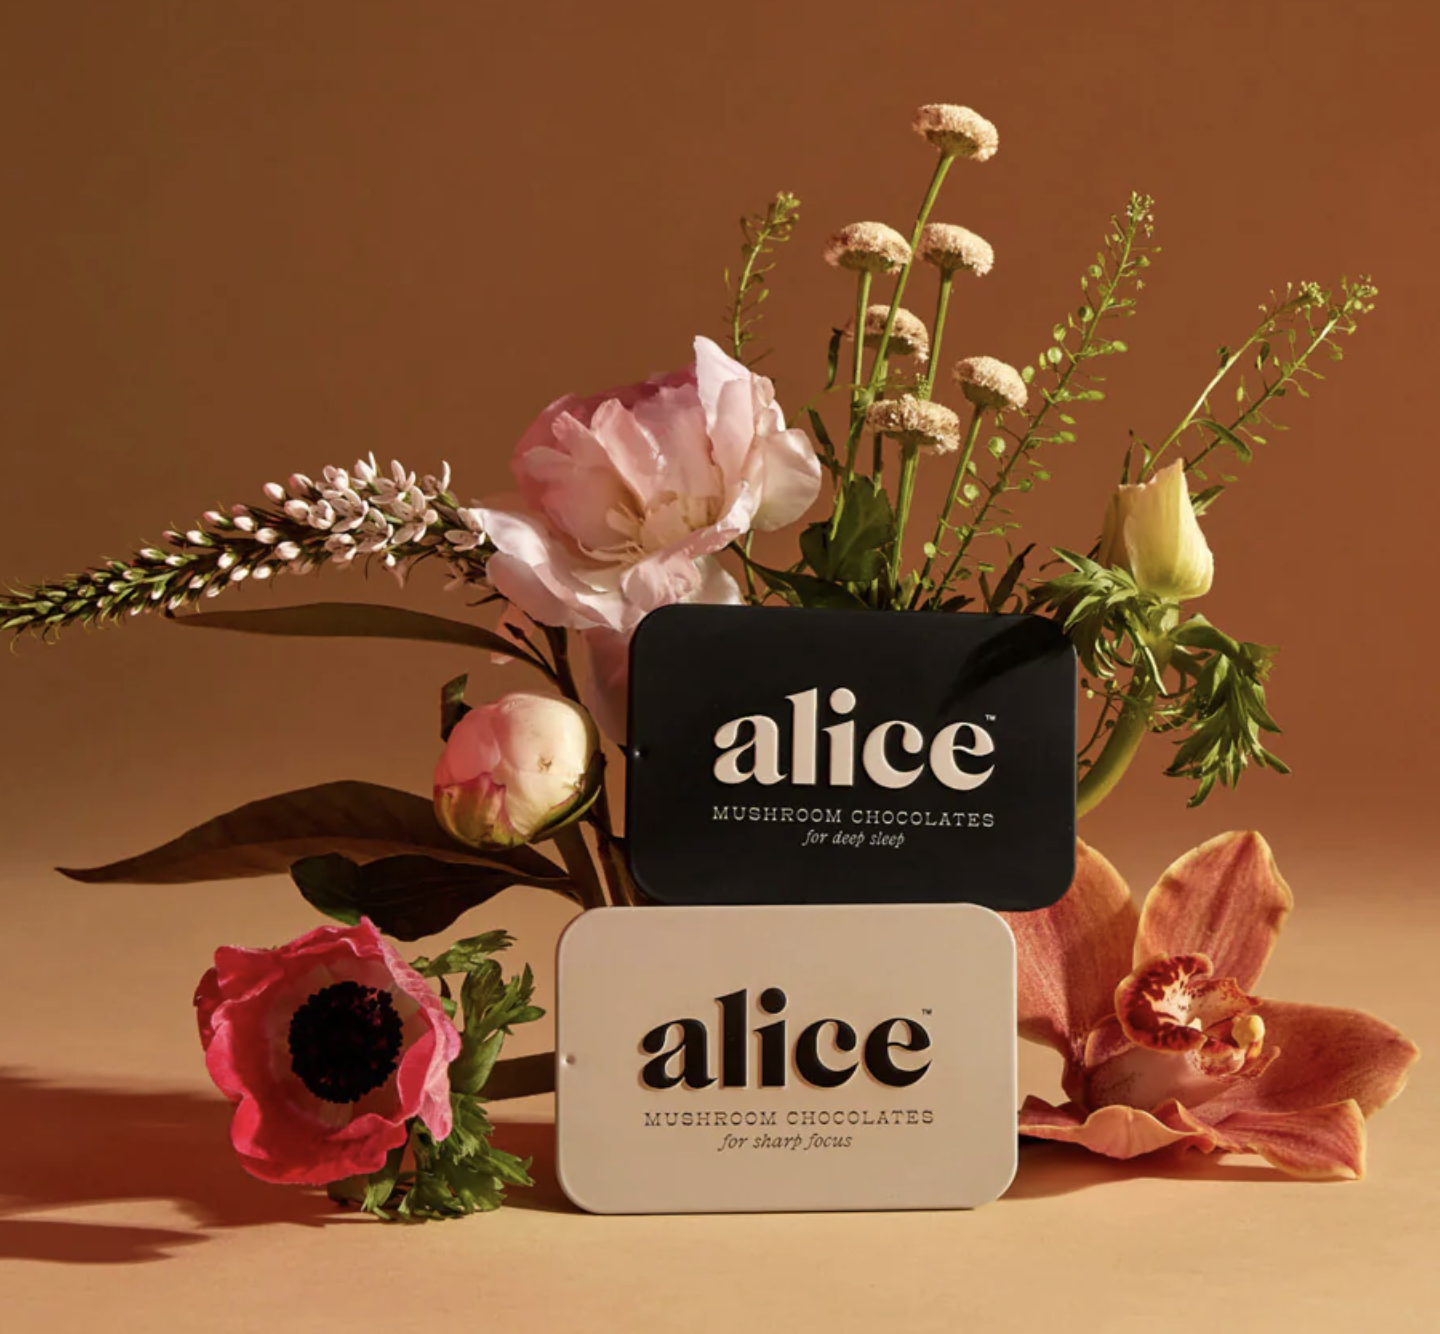 alice chocolate boxes on table with flowers